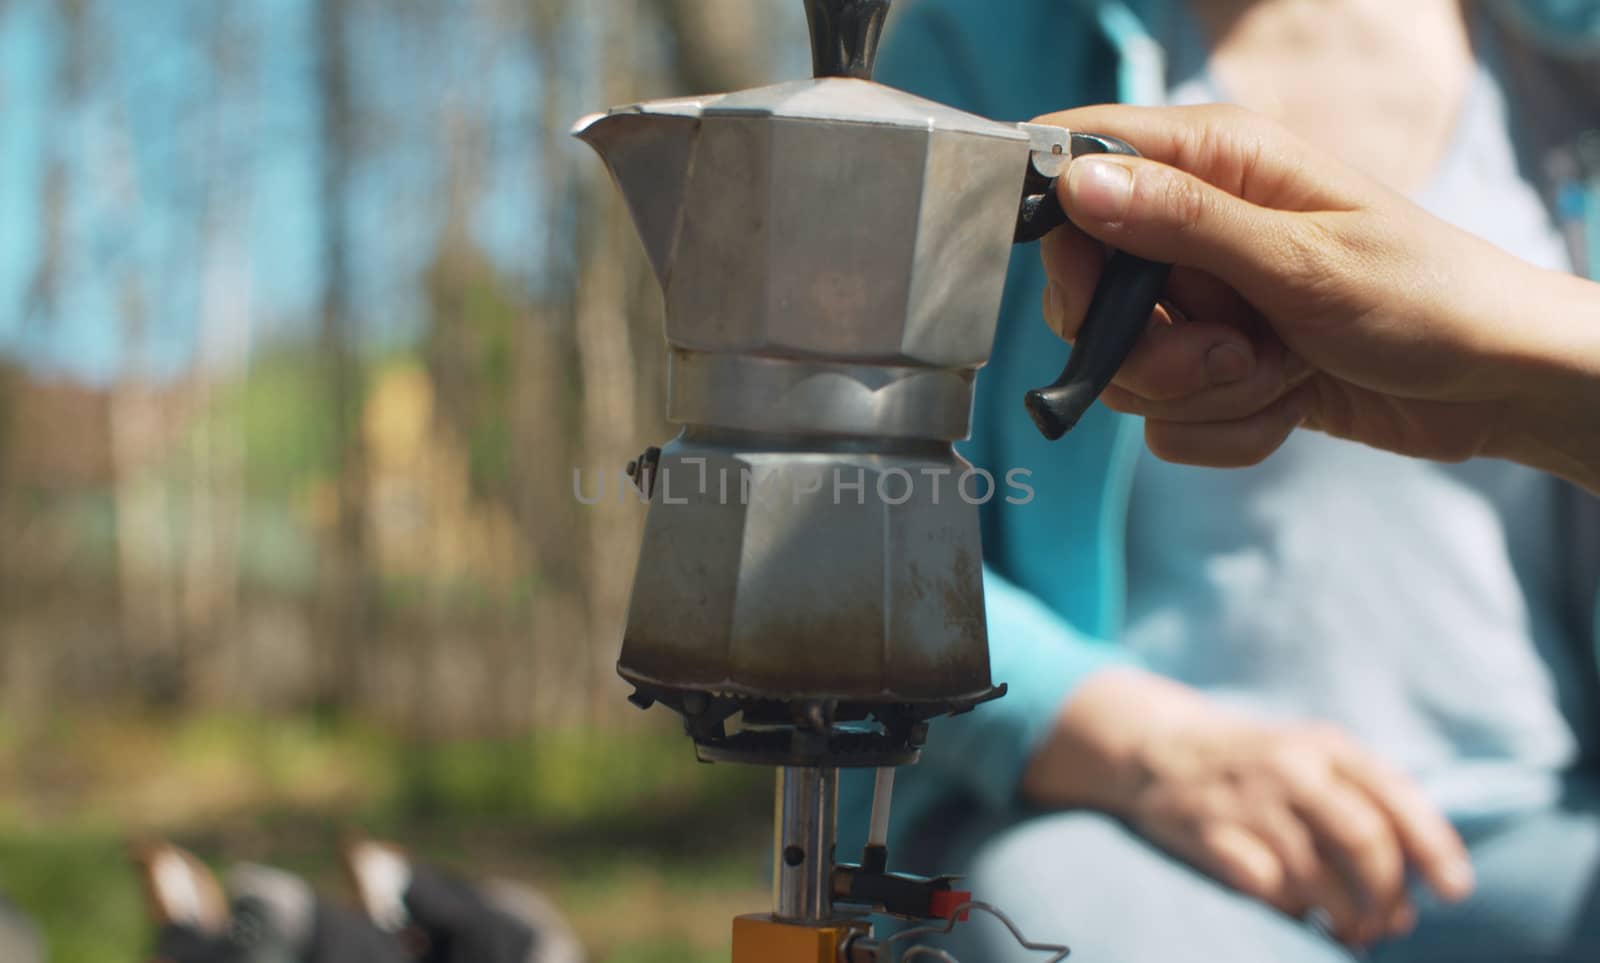 Coffee making in the forest on burner by Alize